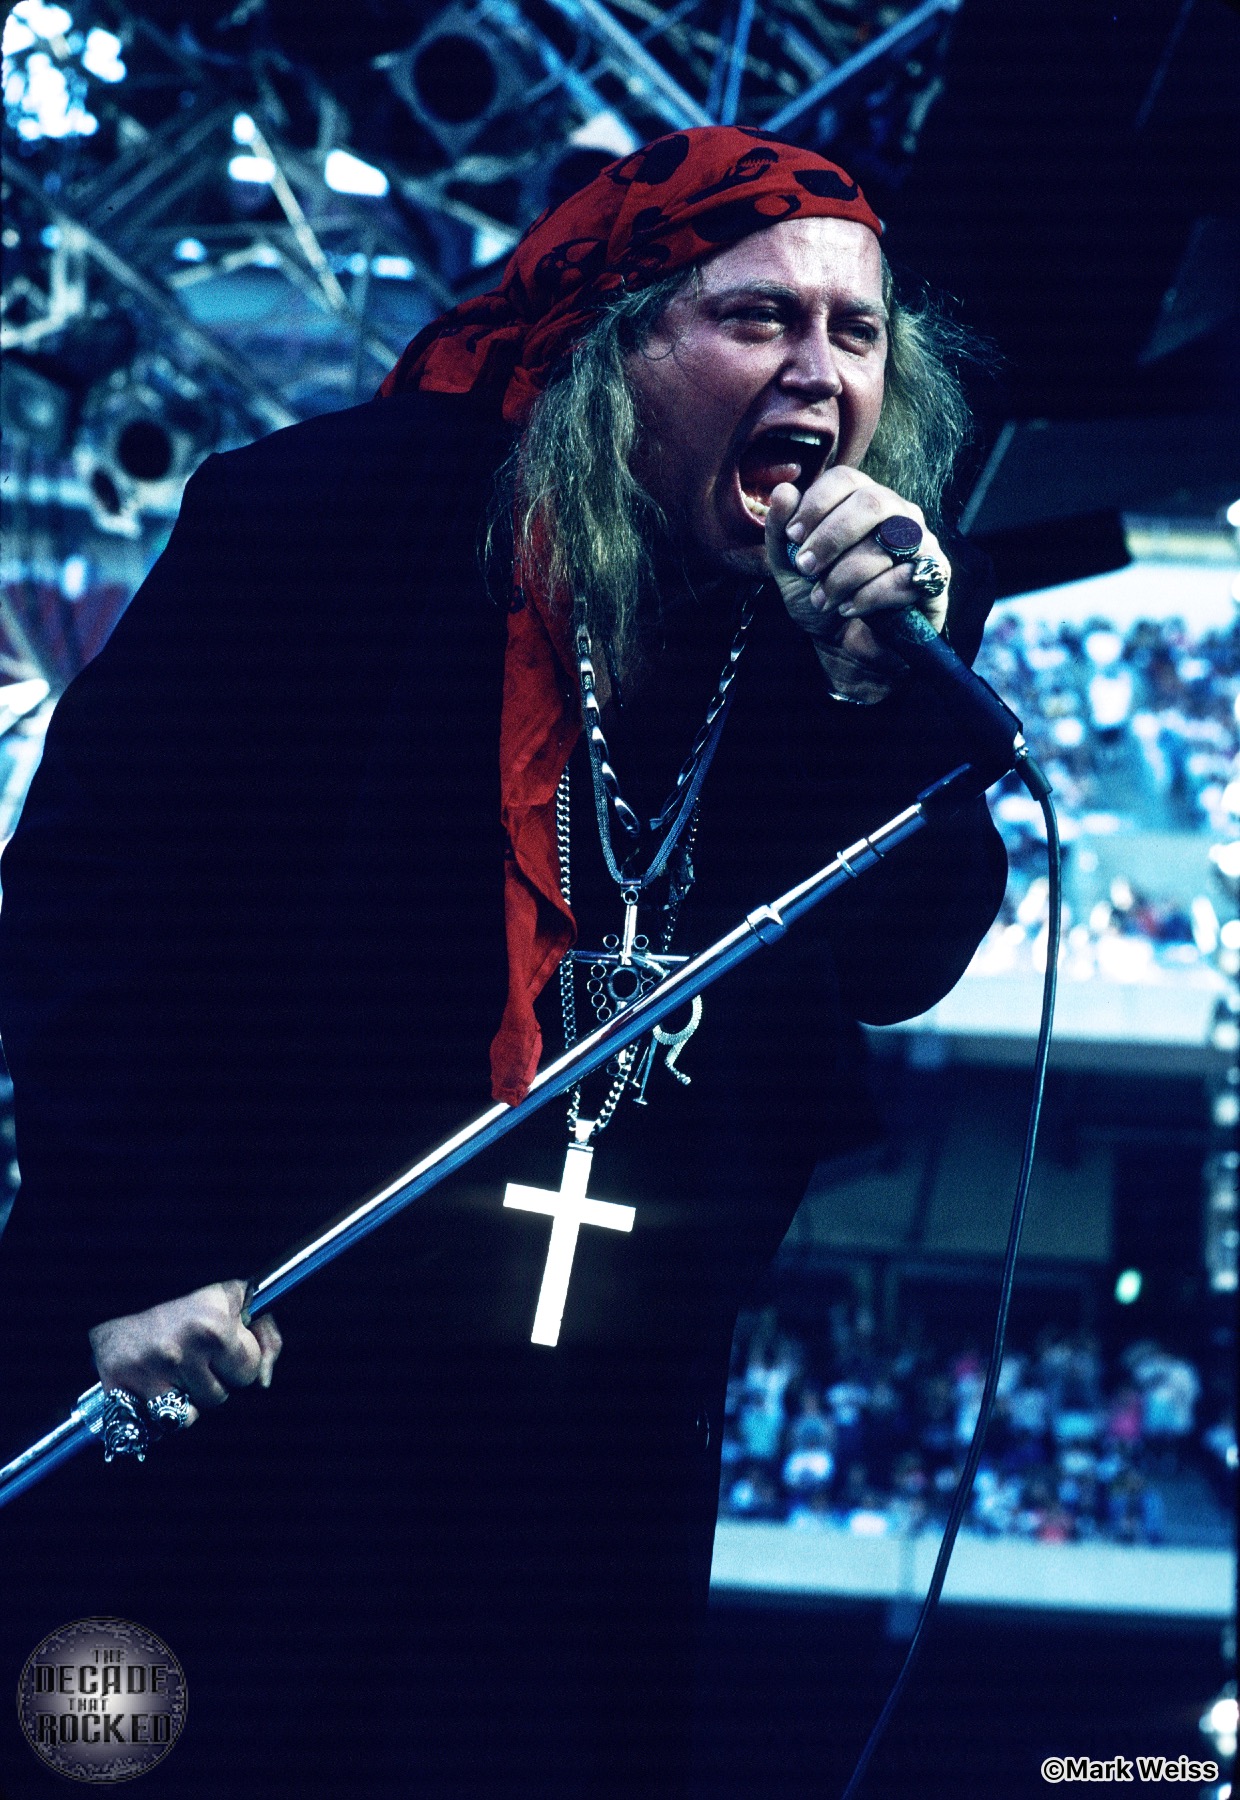 A Sad Day In Rock On April 10,1992 When Sam Kinison Was Killed By A 17 Year Old Drunk Driver Hitting His Car Head On With A Pick Up Truck.